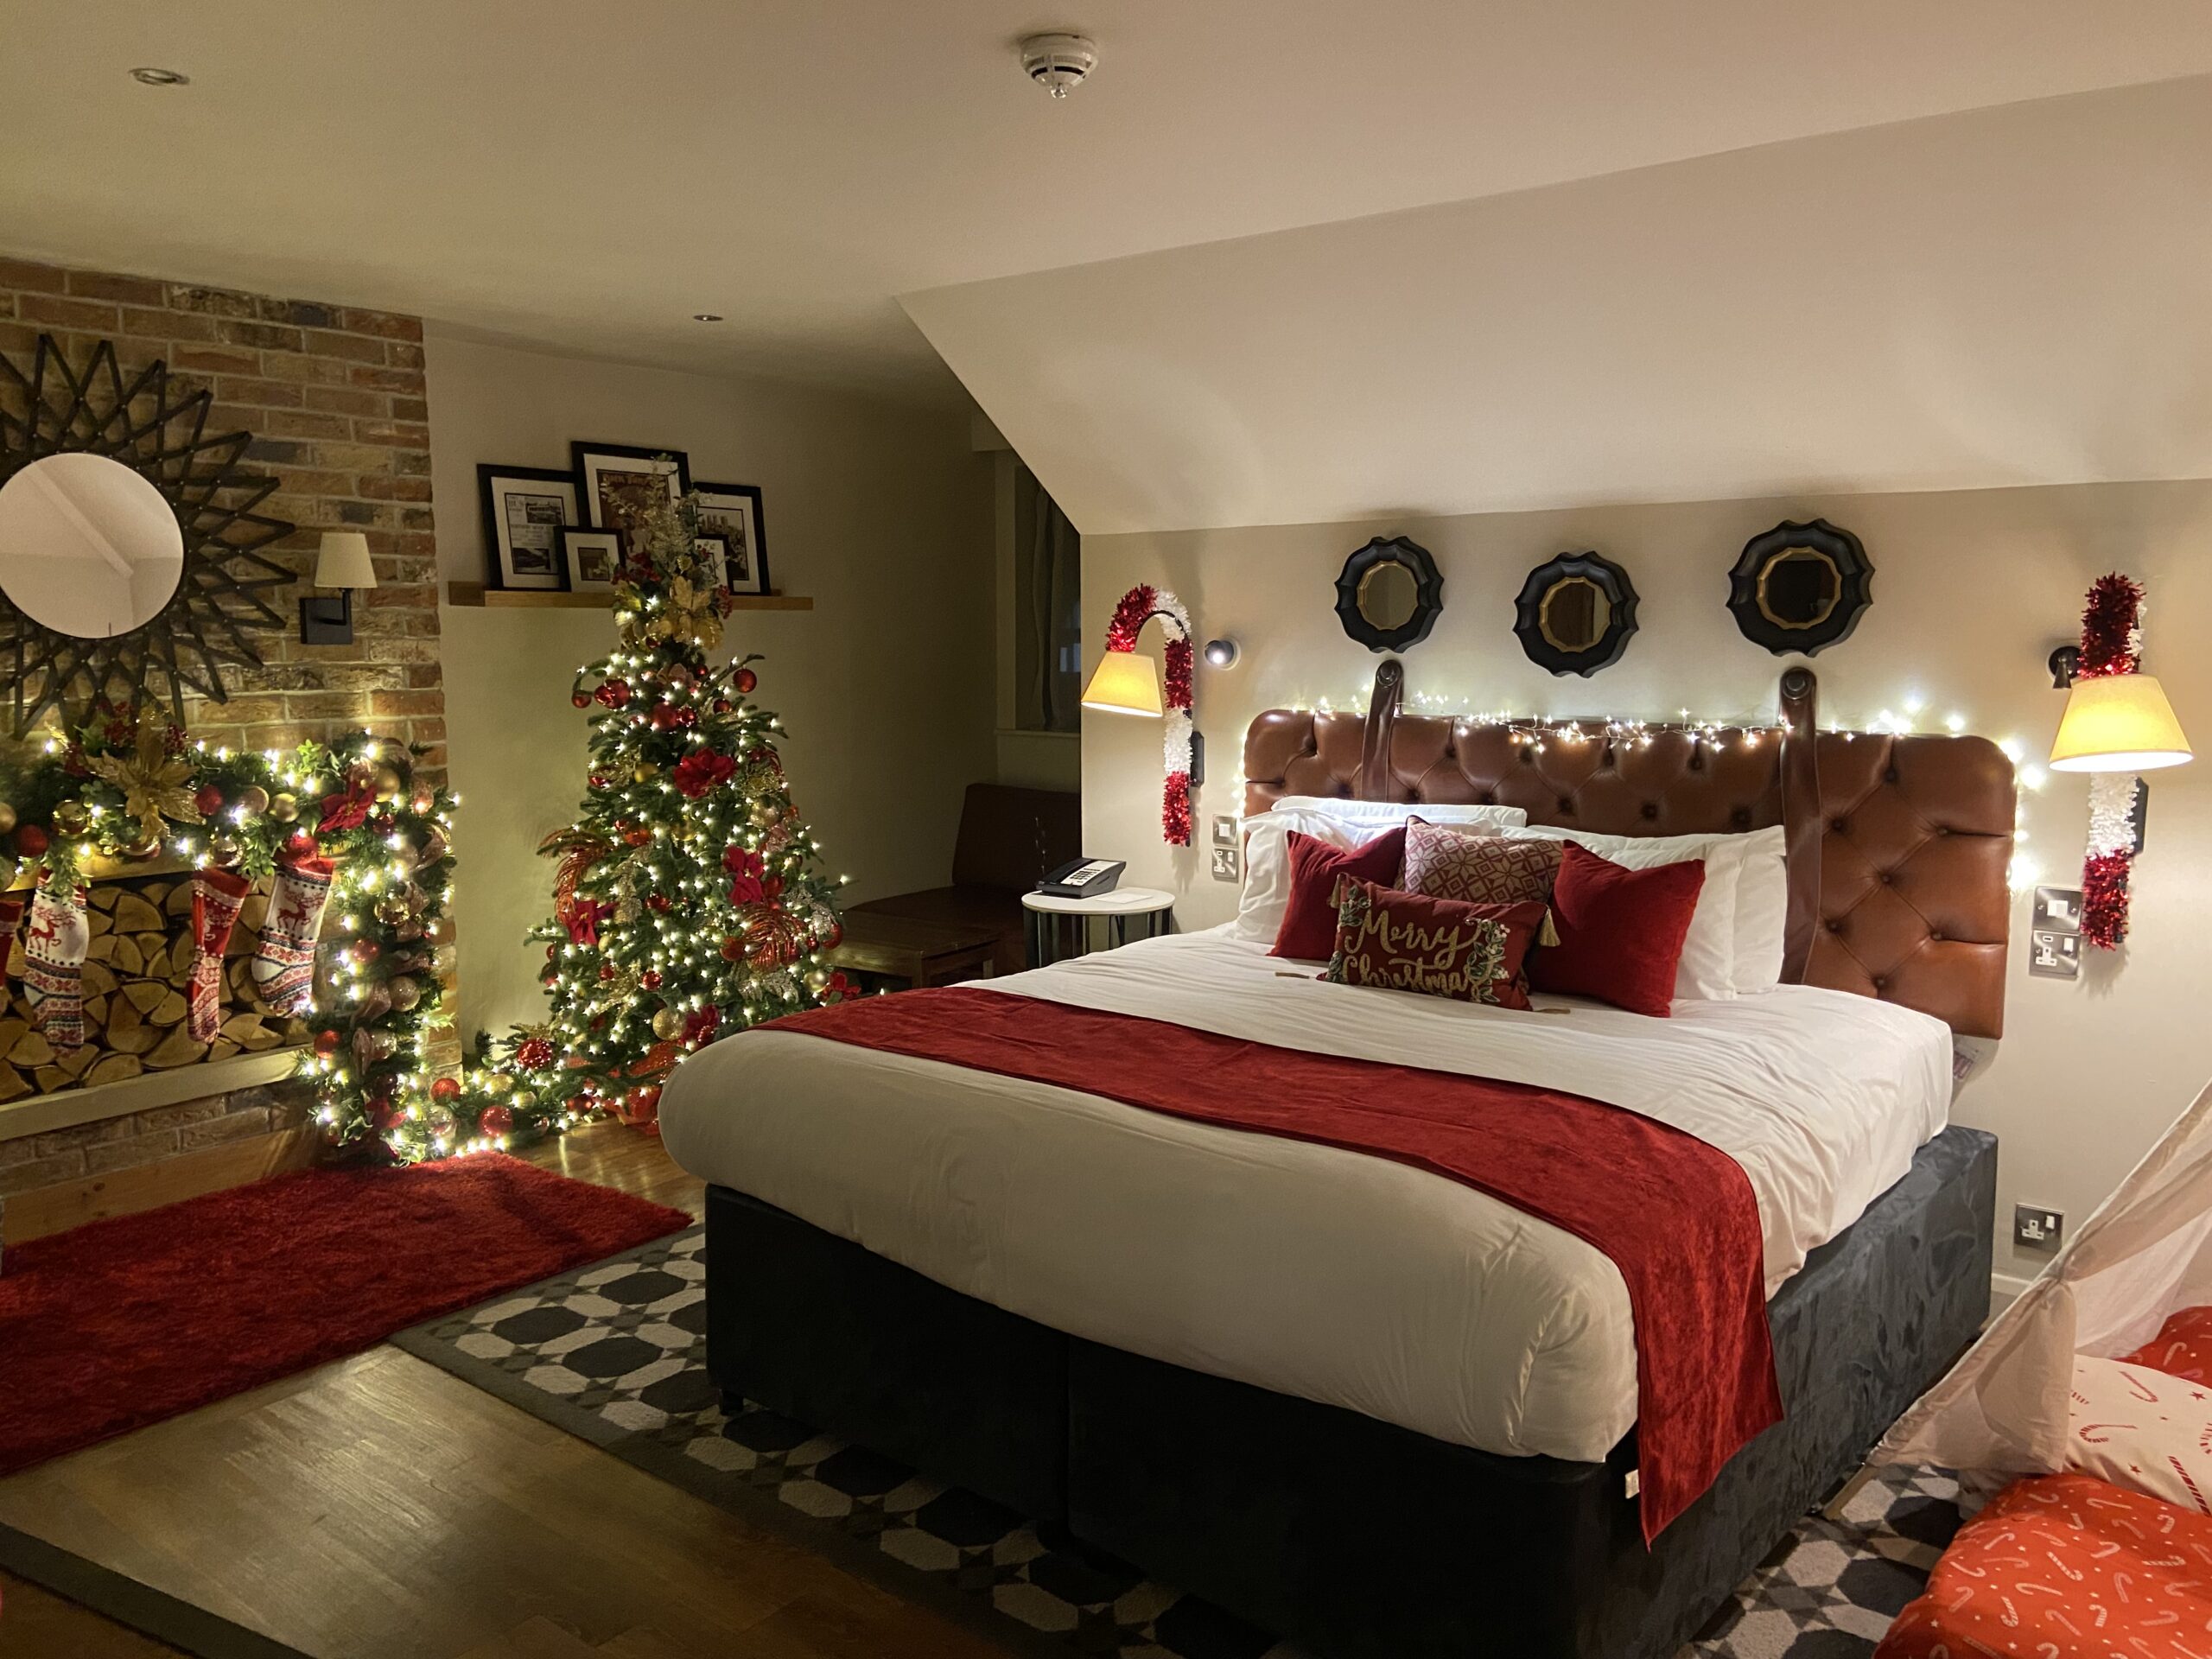 North-Pole-Themed Room In York